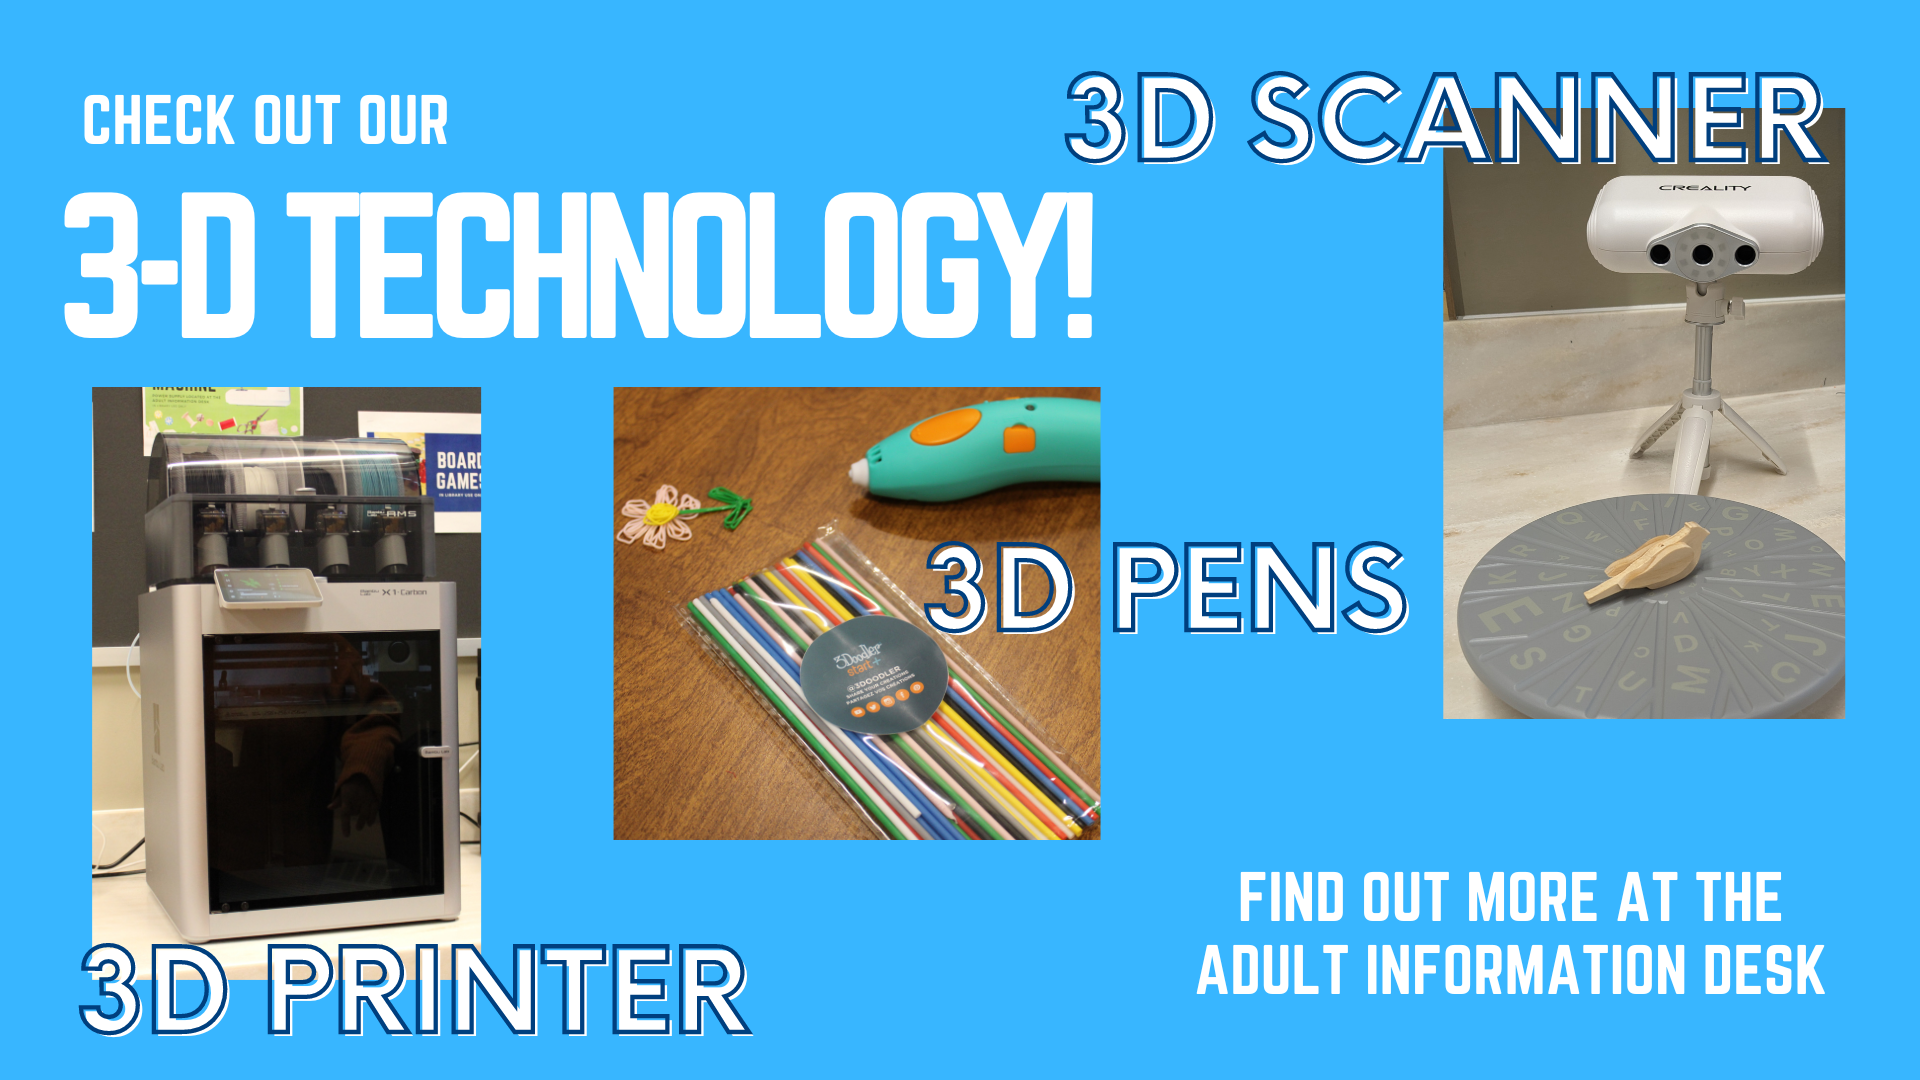 Image of 3D printer, 3D scanner, and 3D pens with text Check out our 3-D technology! 3D Printer, 3D Pens, 3D Scanner. Find out more at the adult information desk.